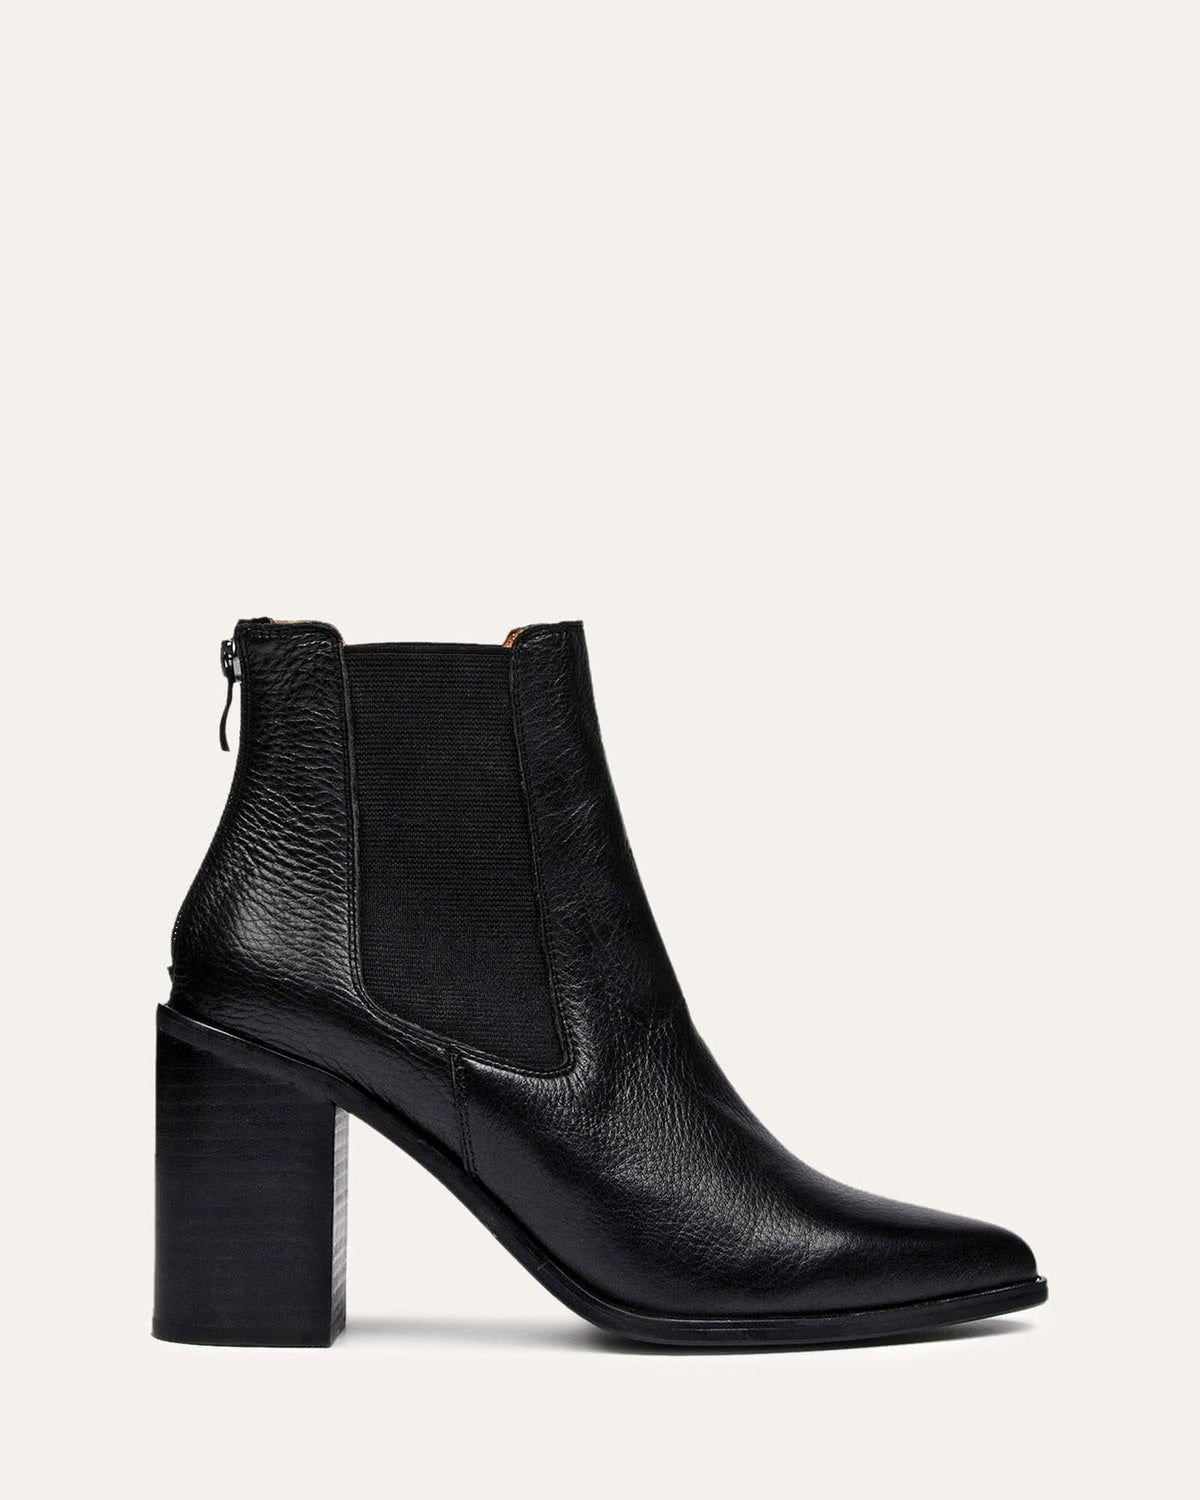 LOVER HIGH ANKLE BOOTS BLACK LEATHER